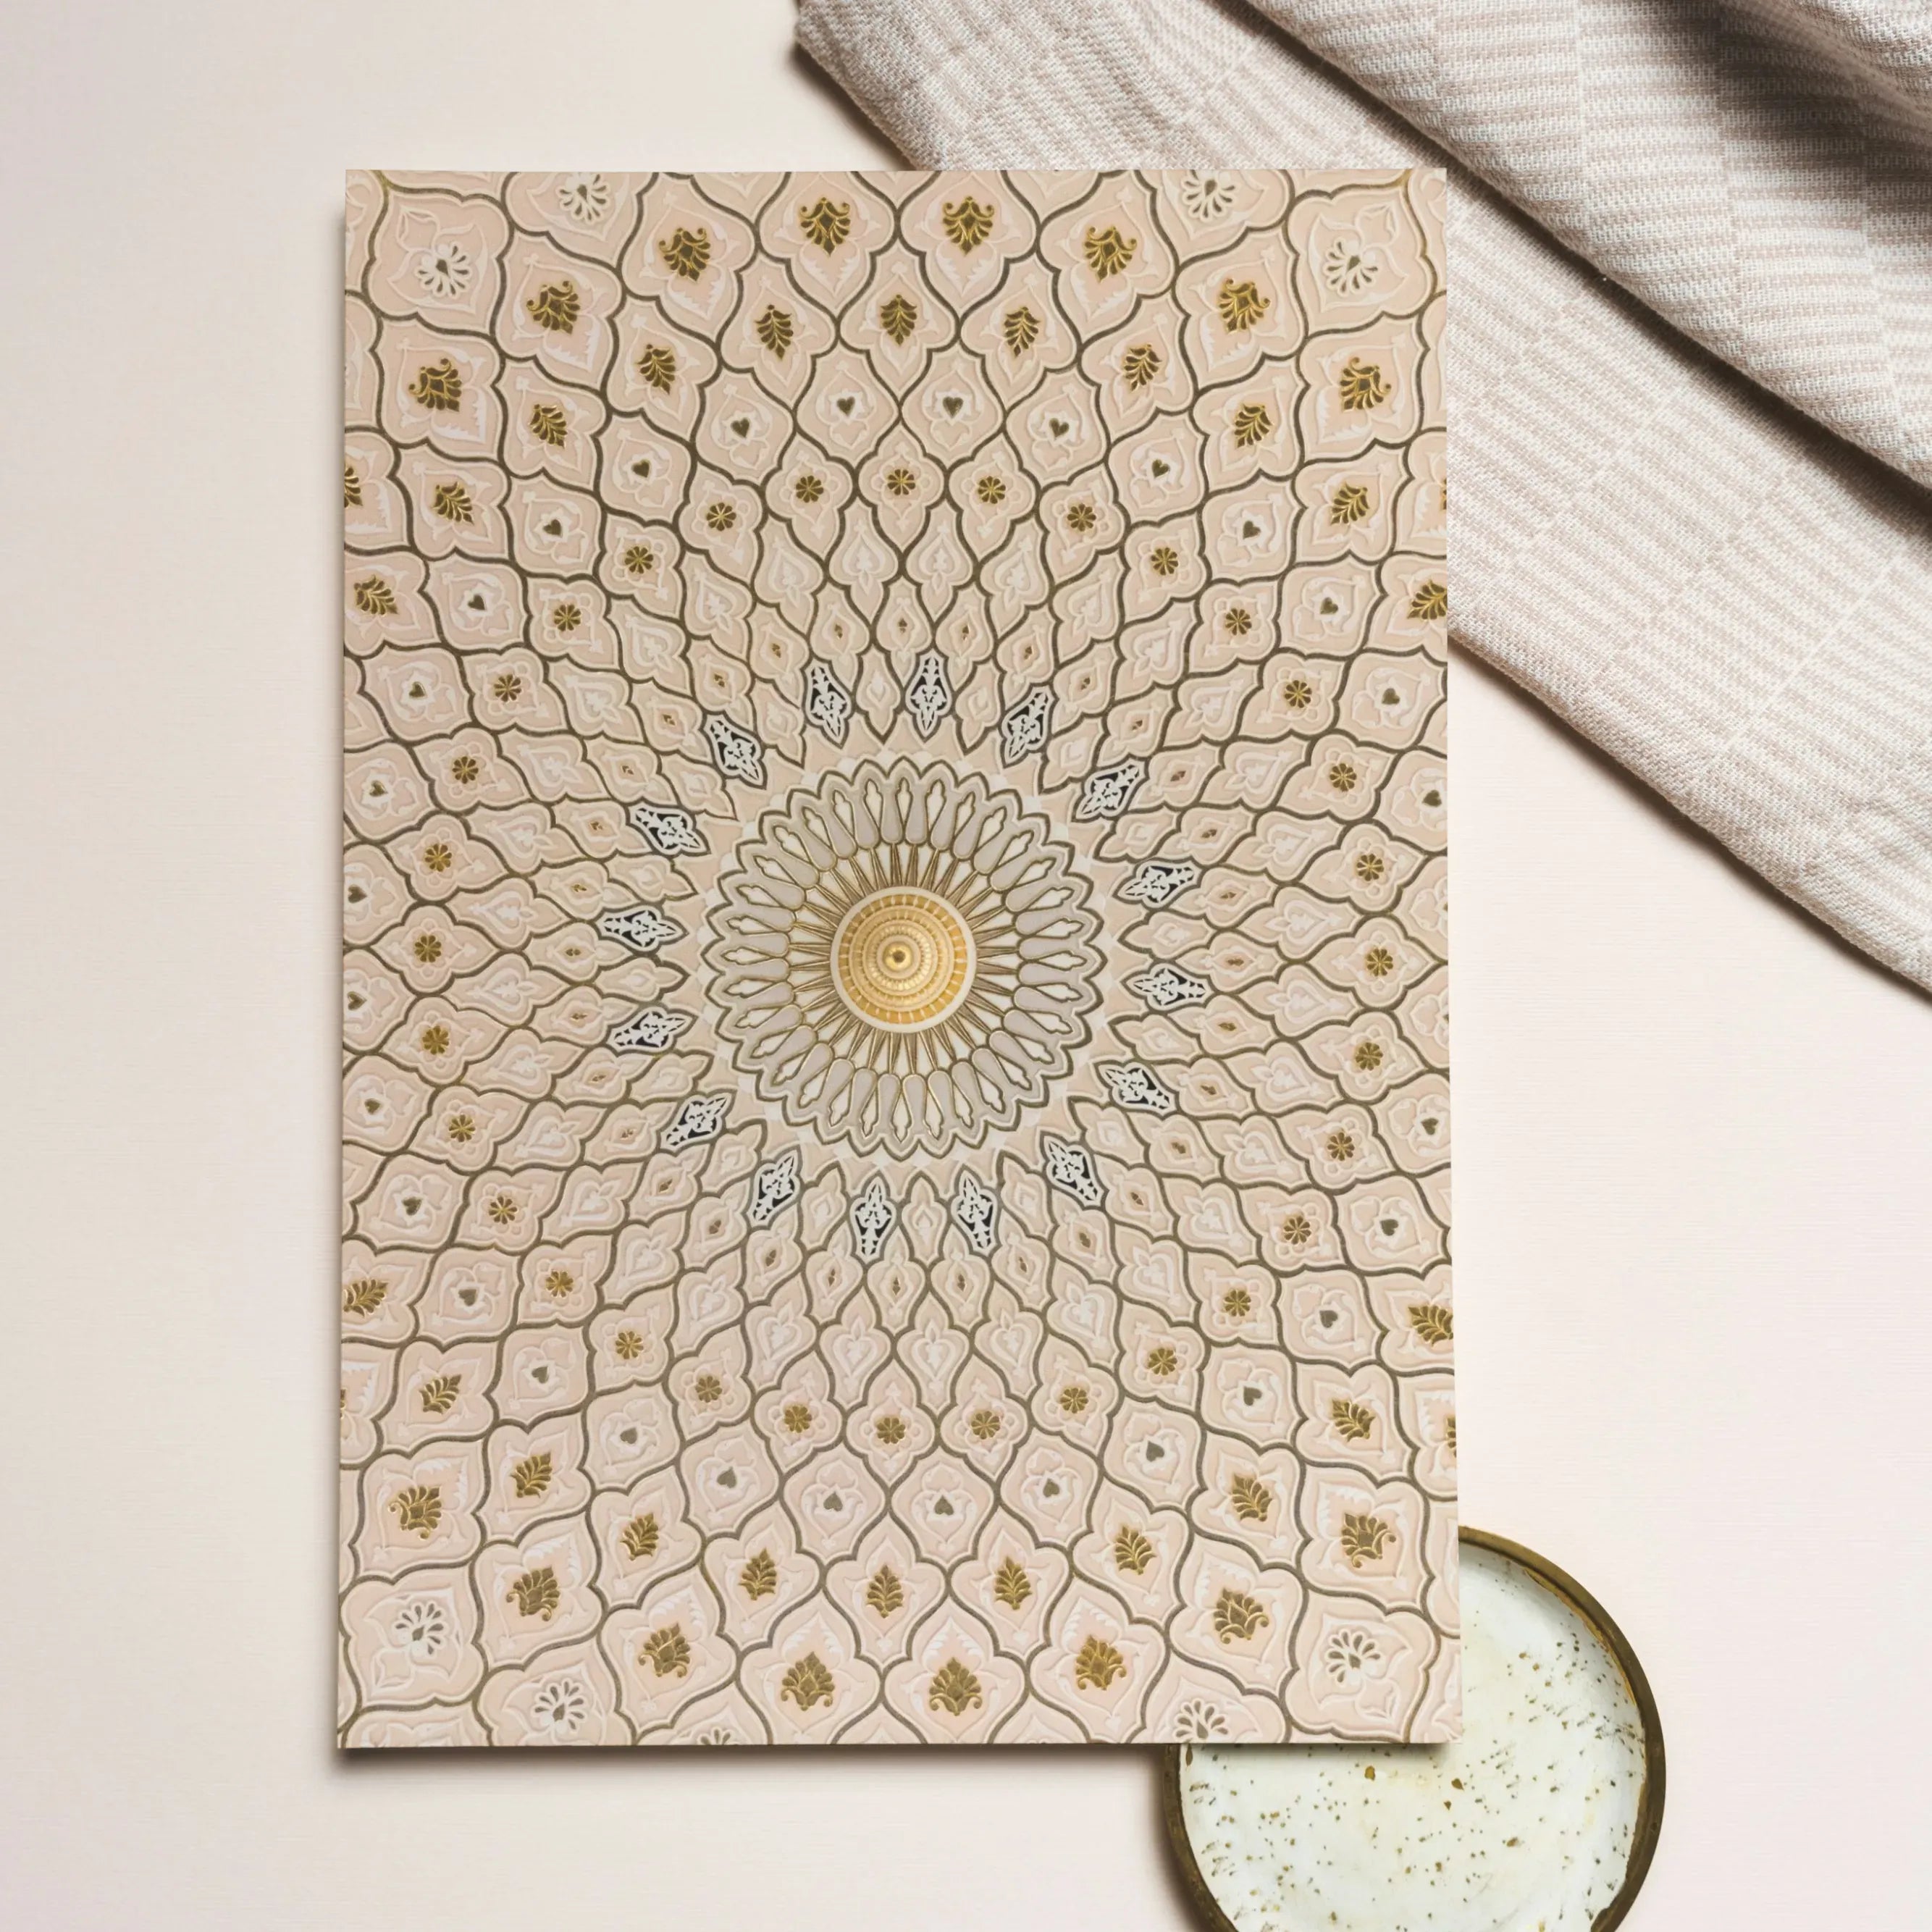 Divine Order Greeting Card - Islamic Geometric Pattern - Greeting & Note Cards - Aesthetic Art